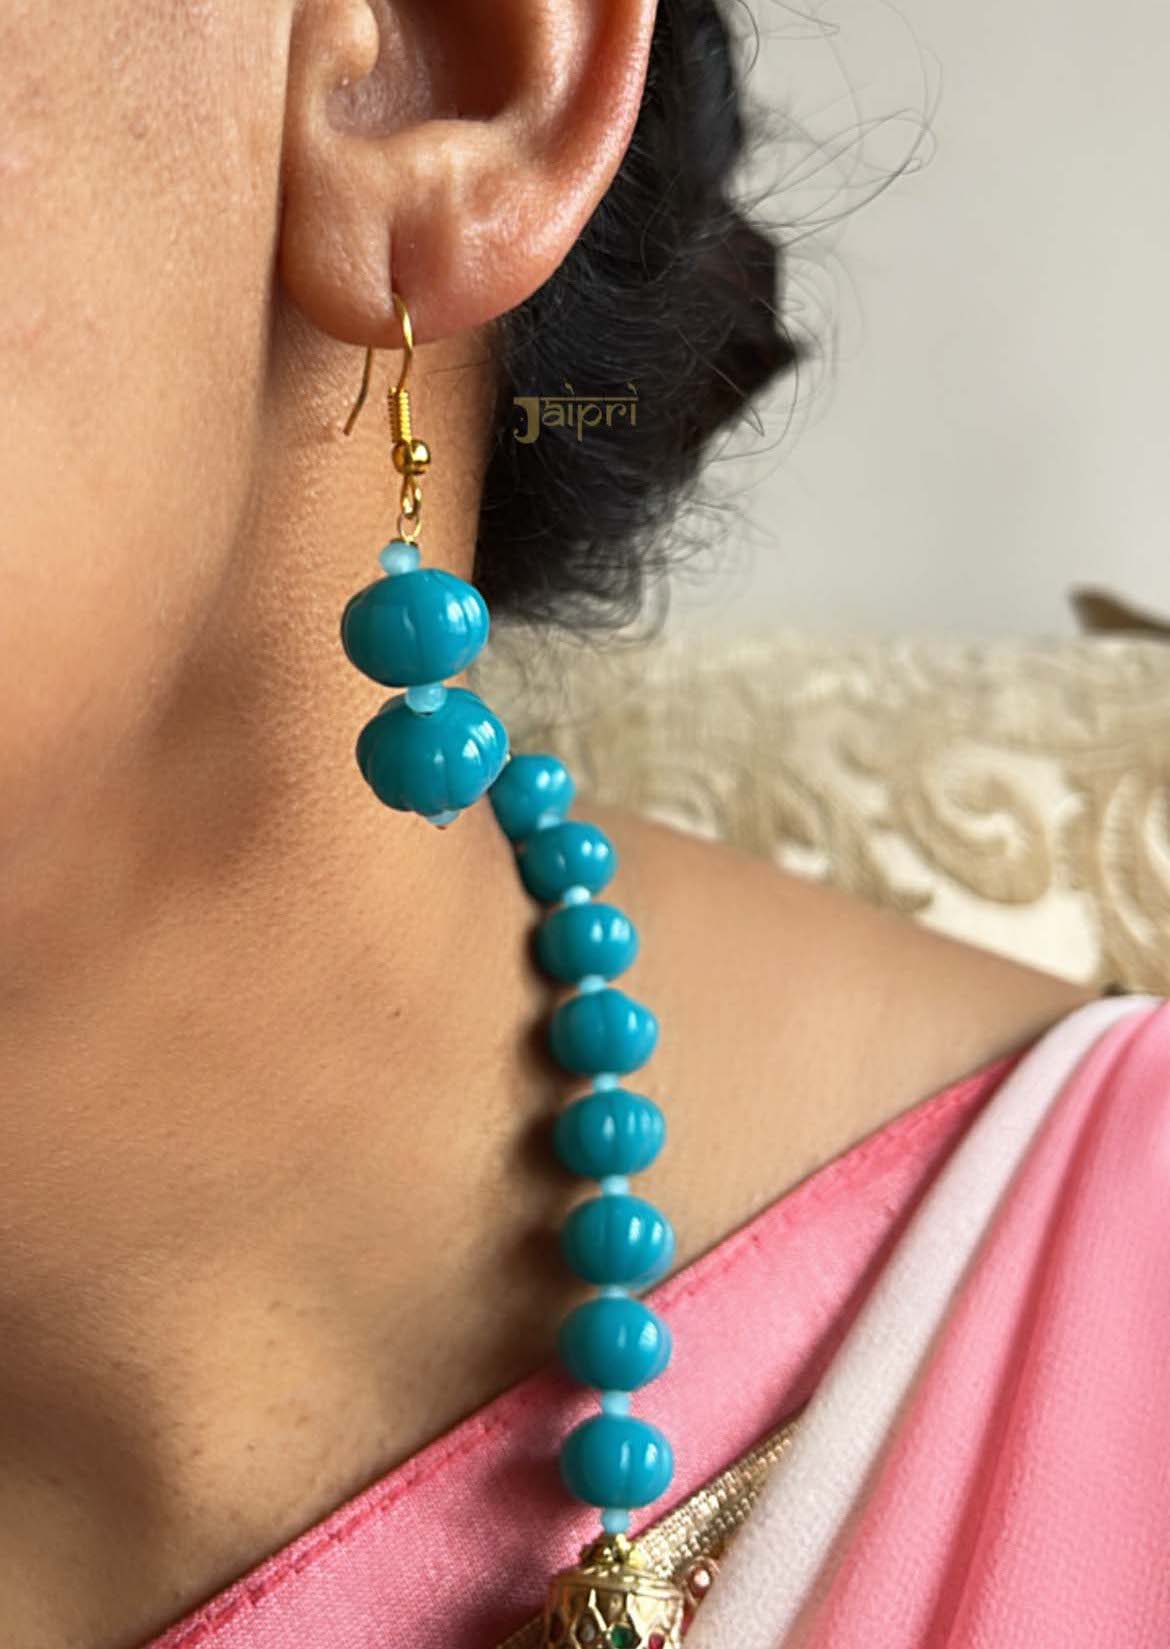 Turquoise Meenakari Adorable Necklace With Earrings